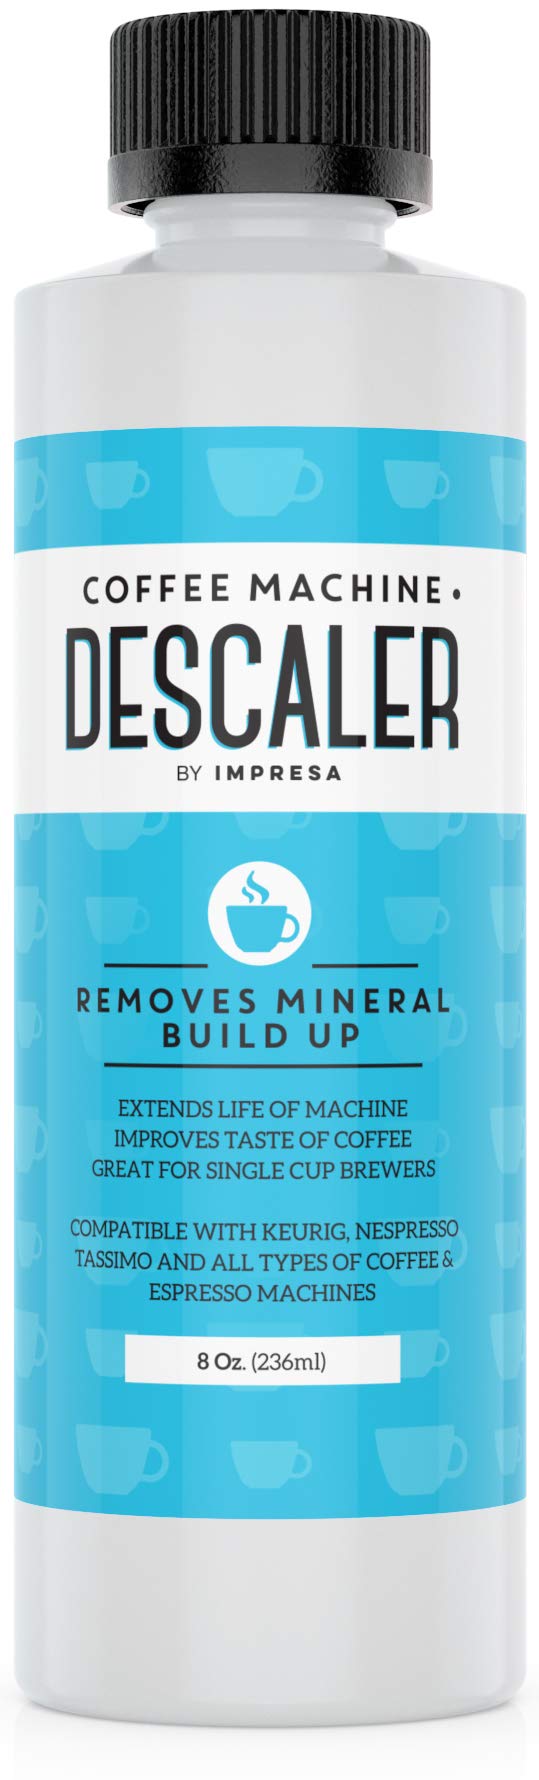 Book Cover Descaler (2 Uses Per Bottle) - Made in the USA - Universal Descaling Solution for Keurig, Nespresso, Delonghi and All Single Use Coffee and Espresso Machines